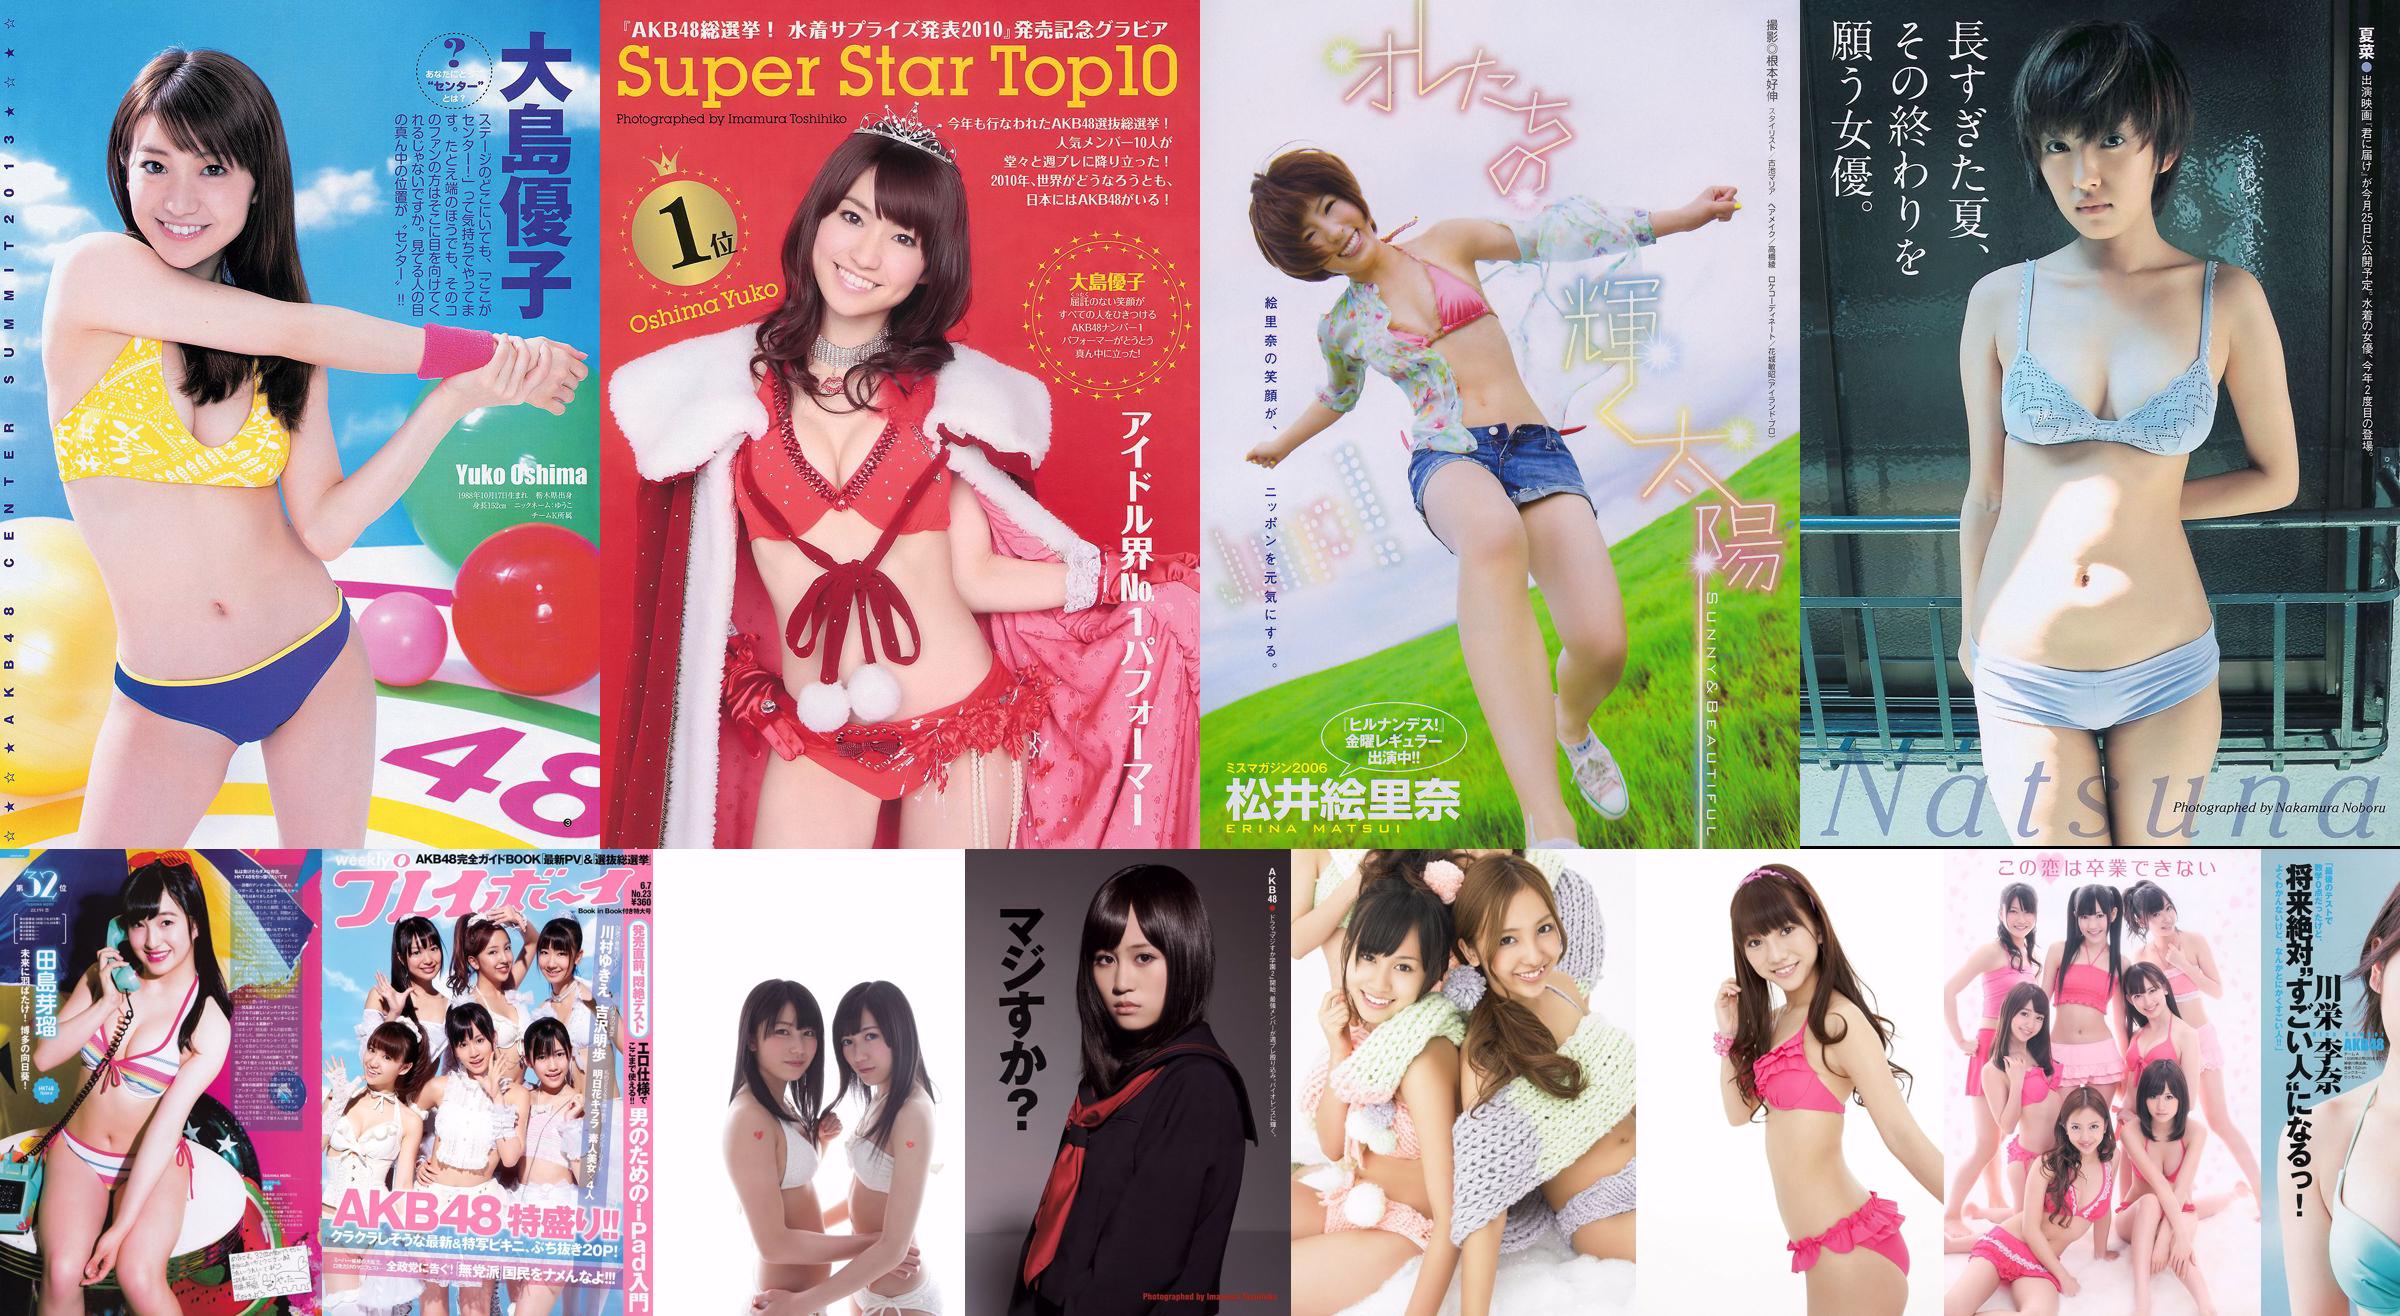 AKB48《DOUBLE ABILITY》 [Weekly Young Jump] 2012年No.26 写真杂志 No.f4295d 第1页